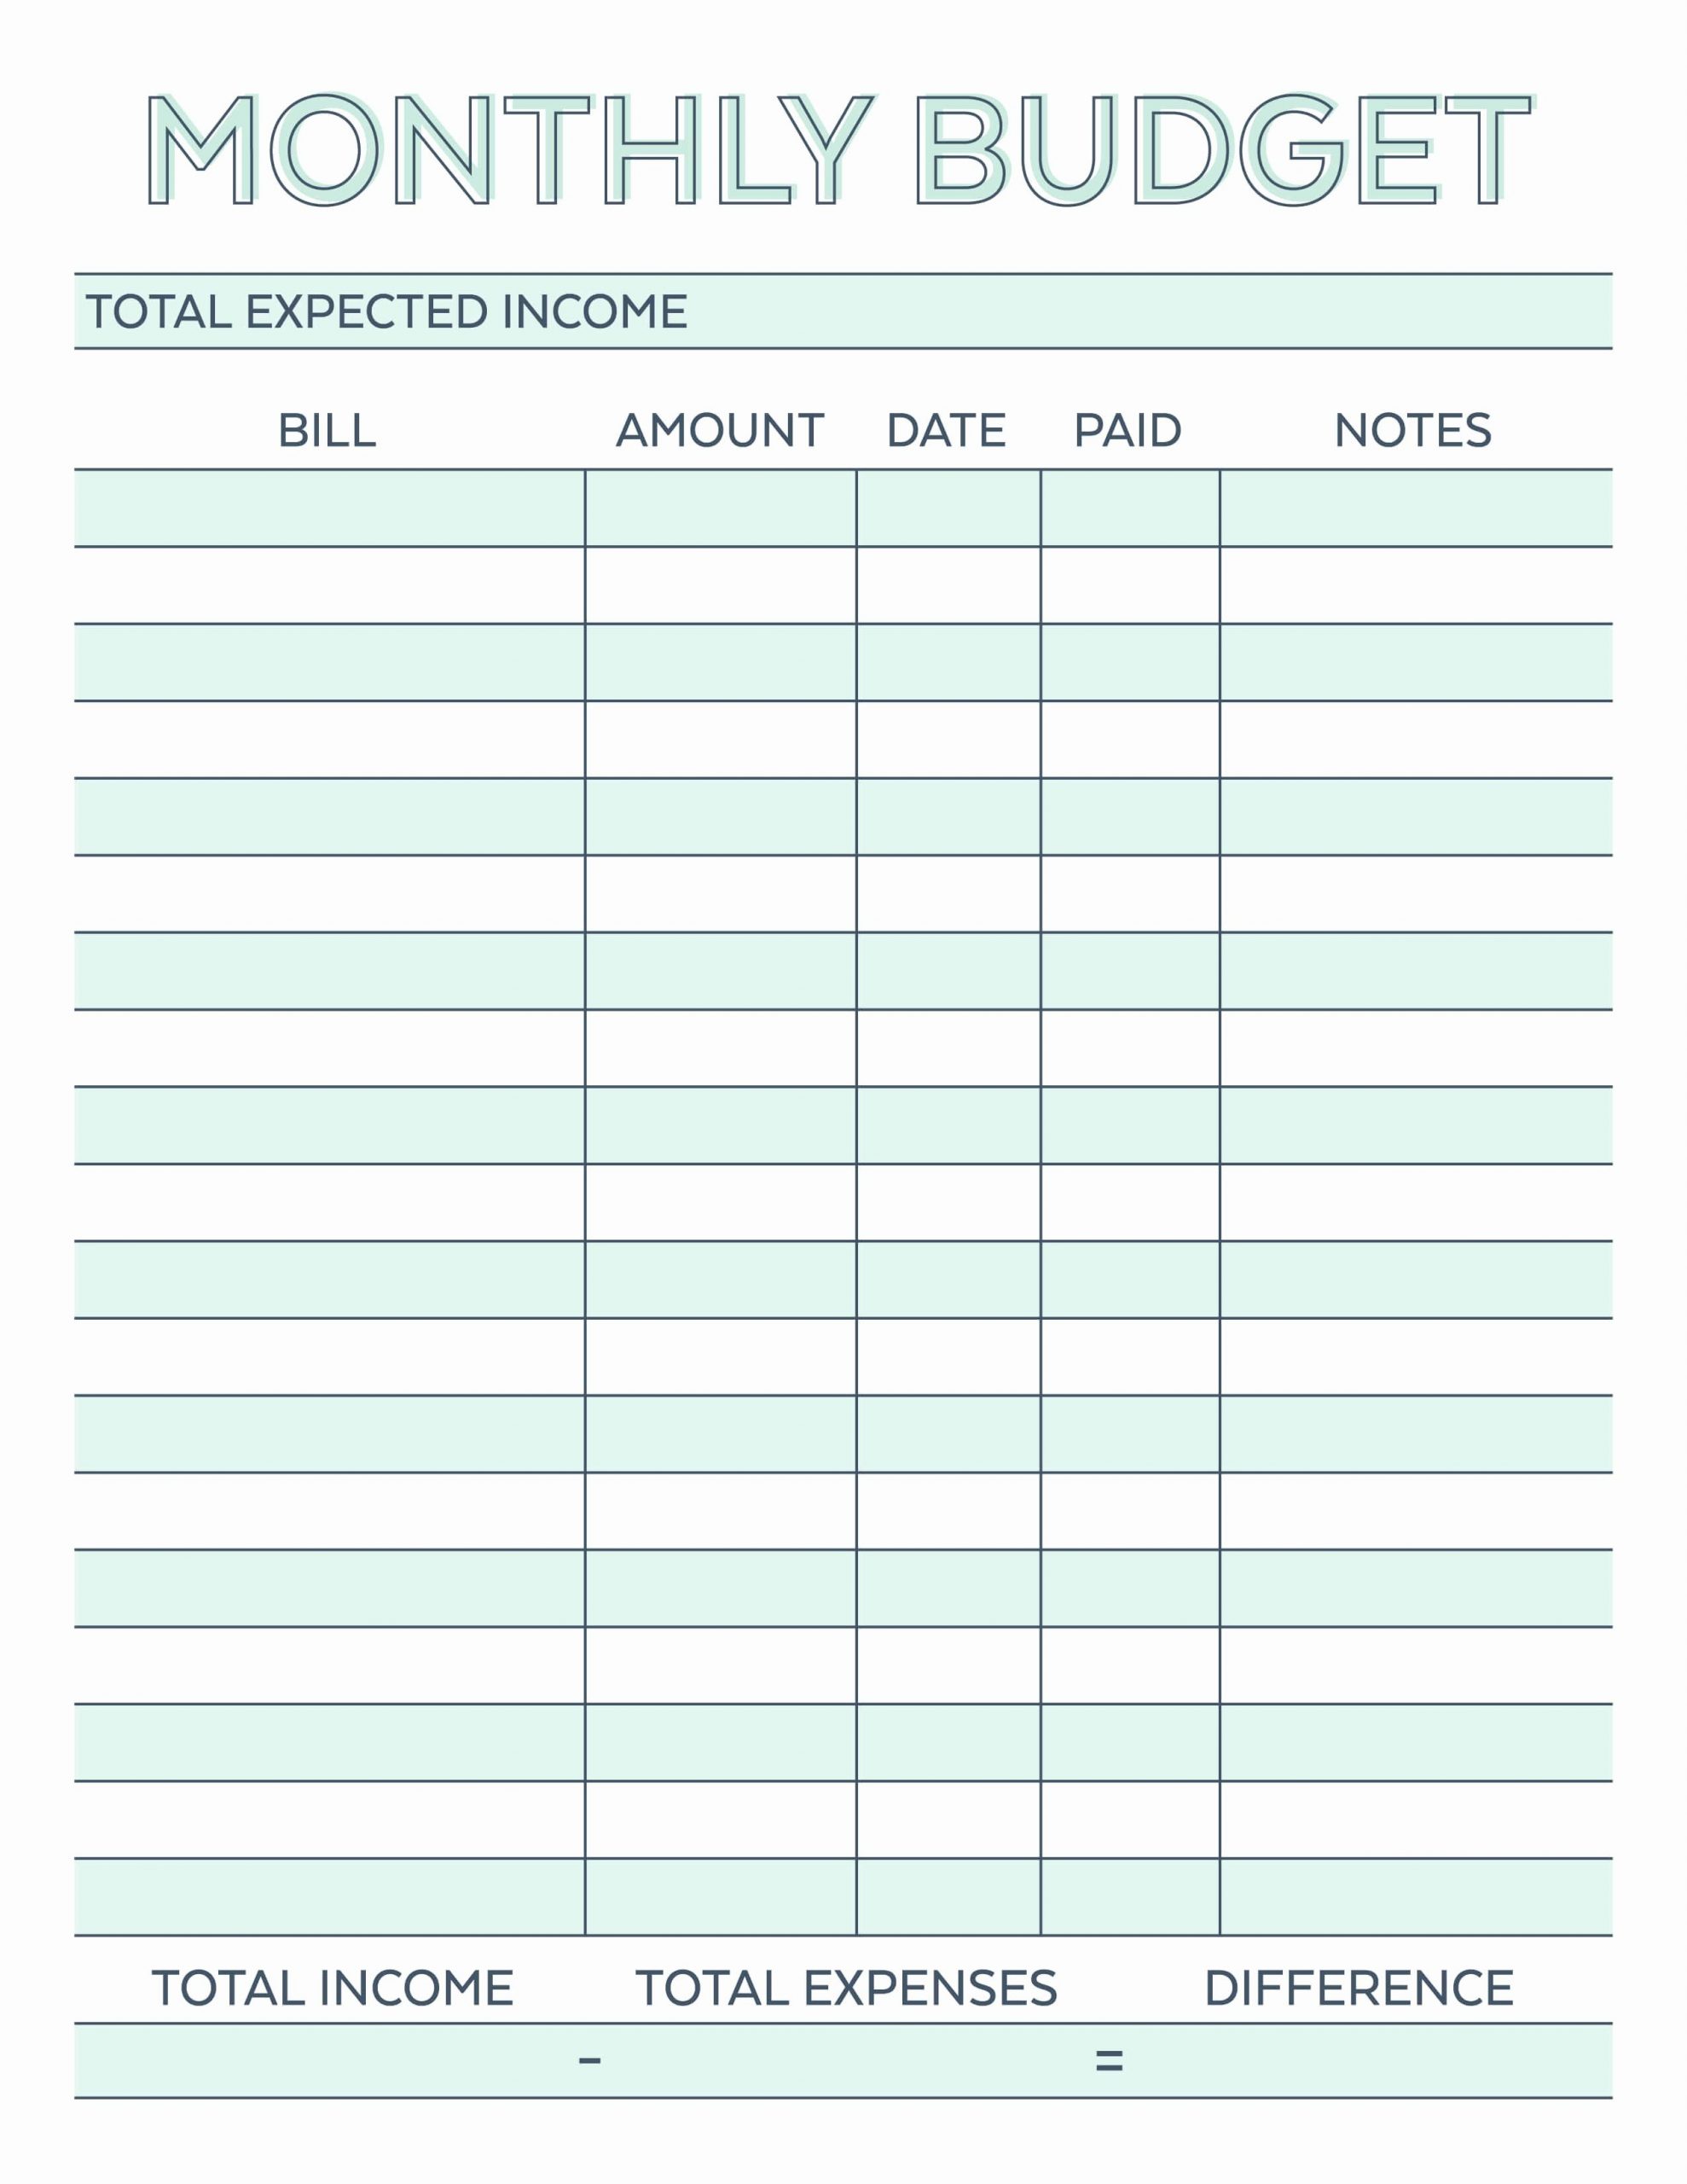 Collect Printable Weekly Bill Planner